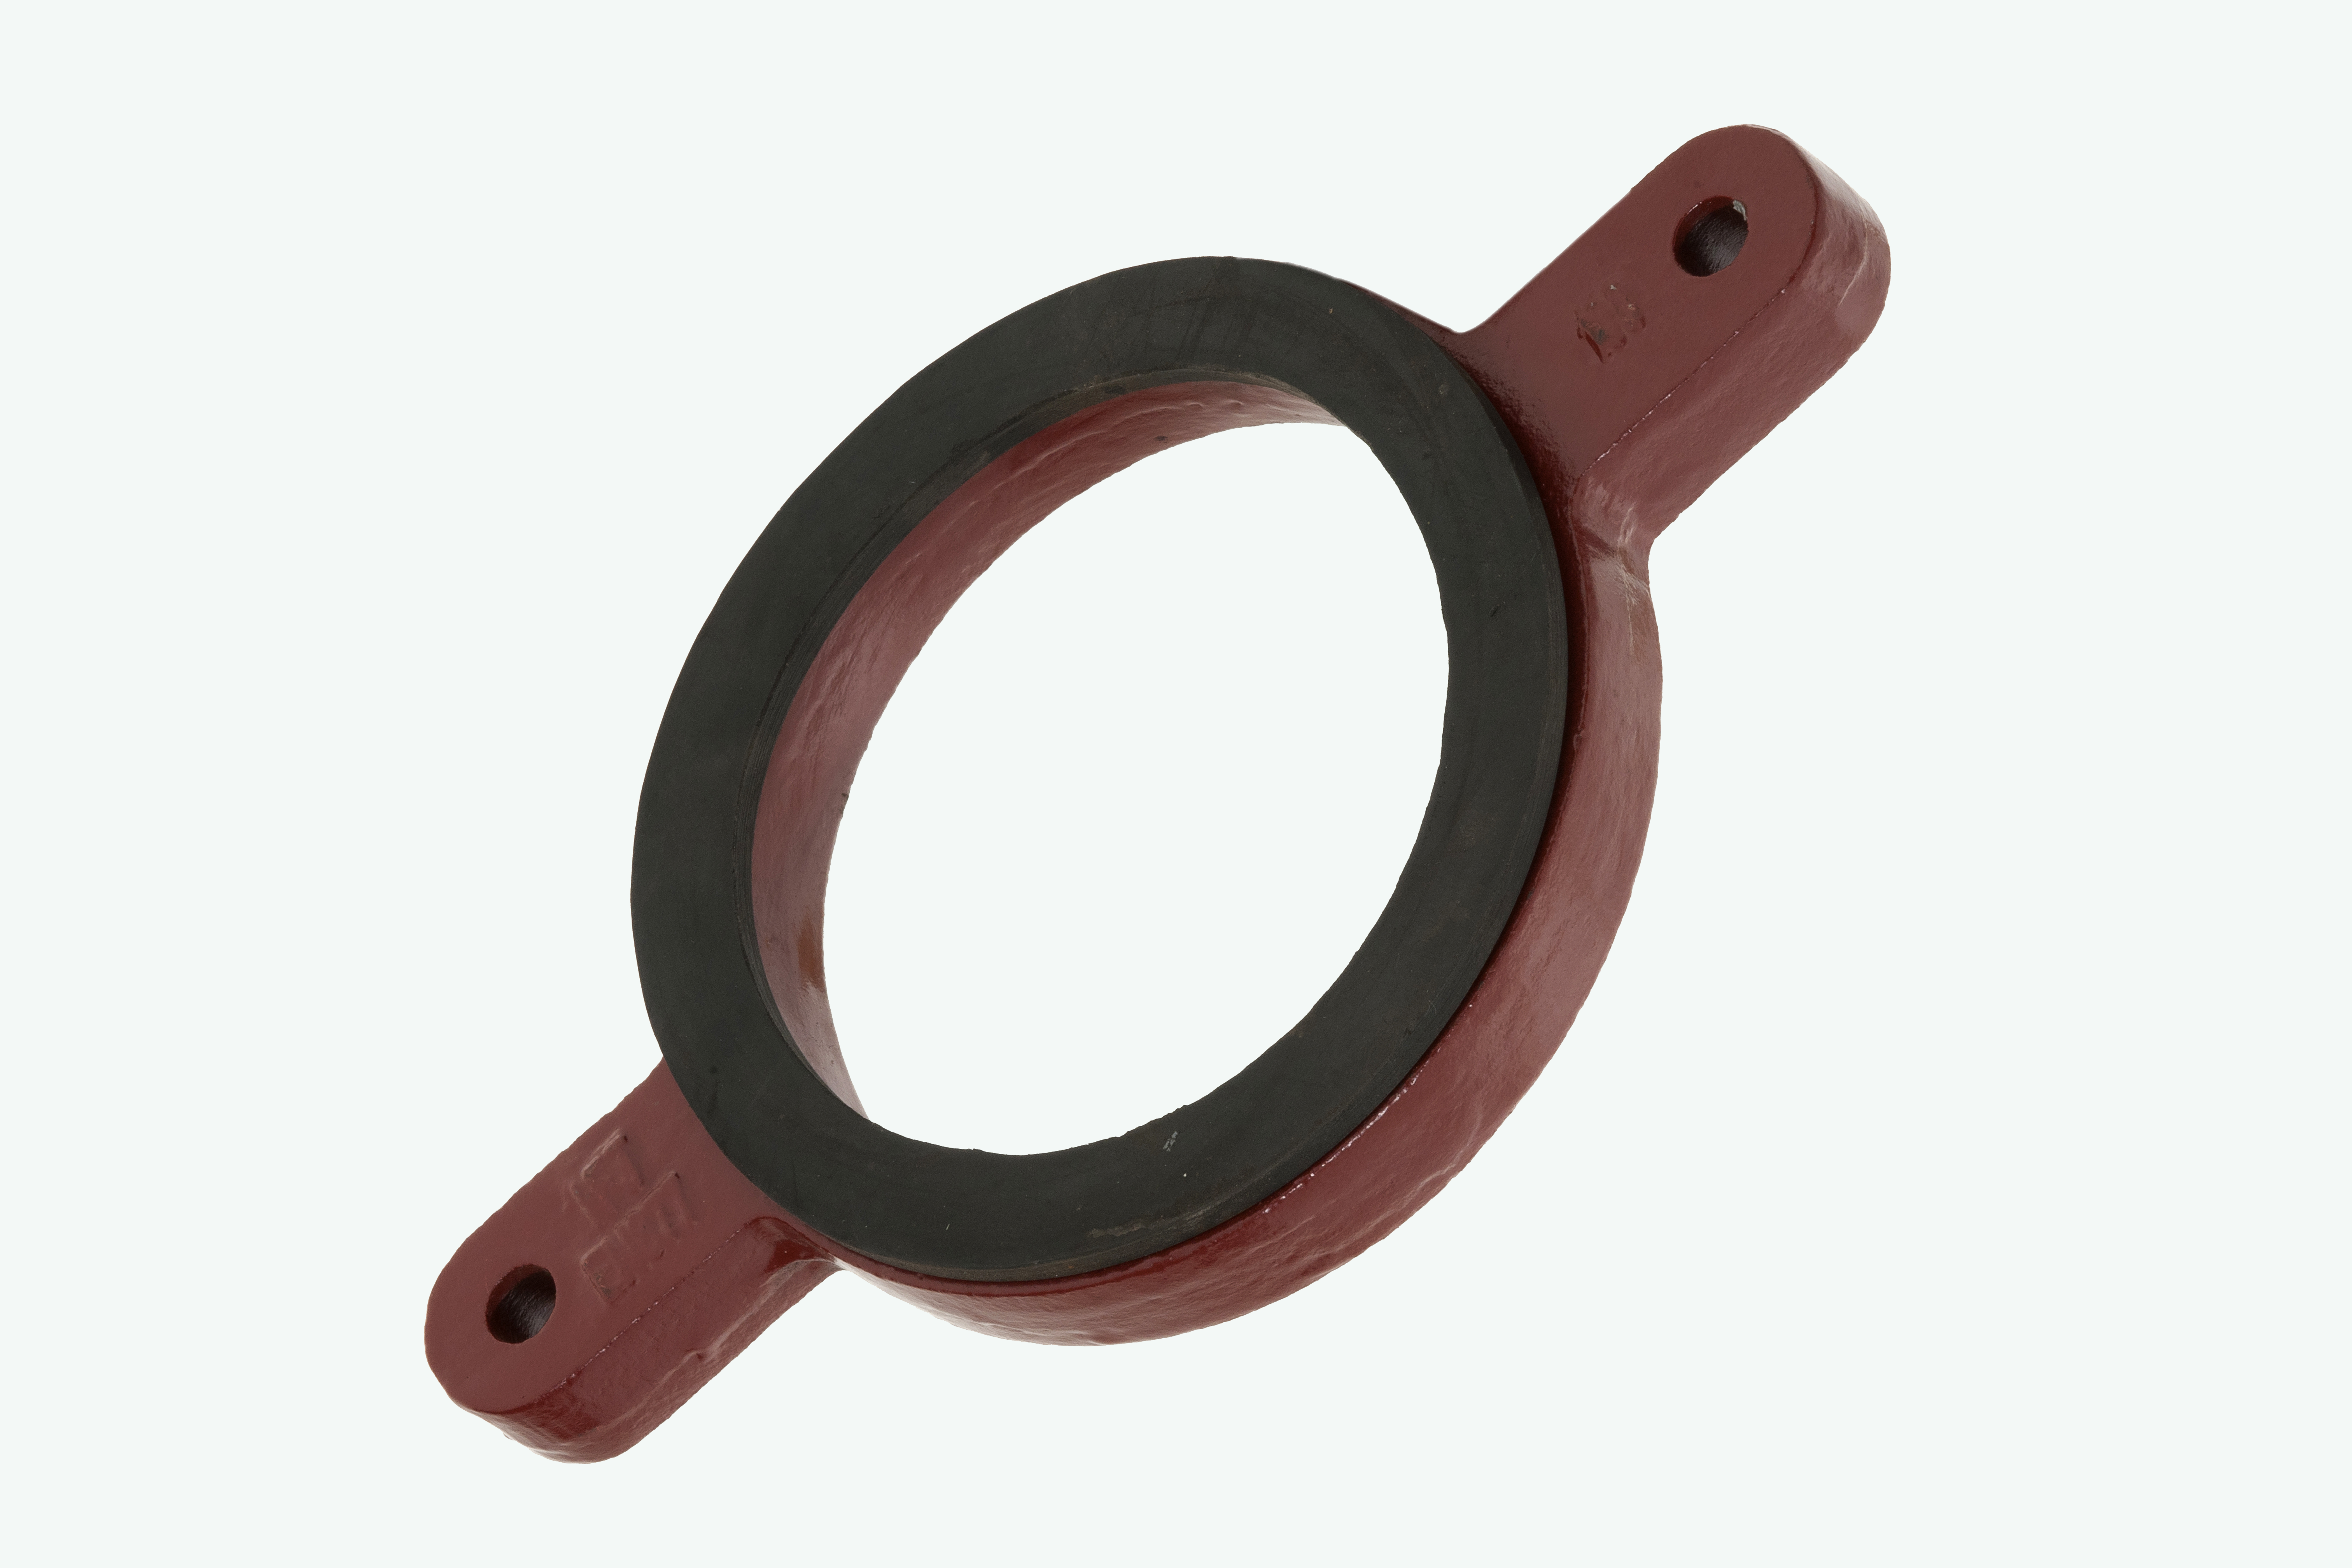 Stack Support Bracket with Gasket